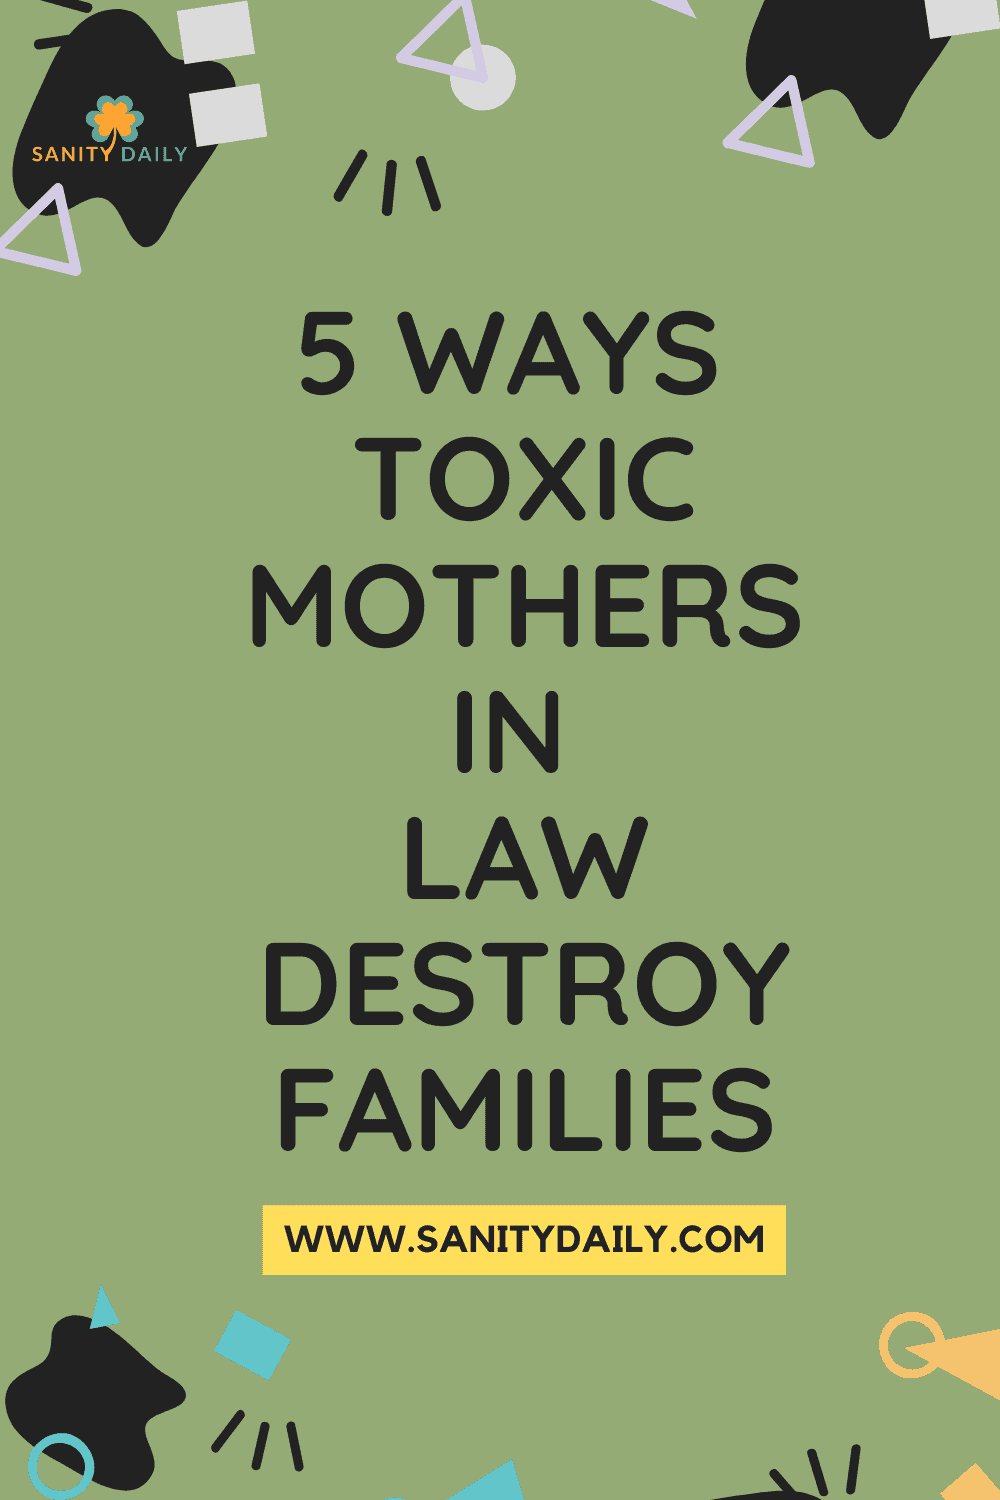 How Toxic Mothers in law Destroy Families